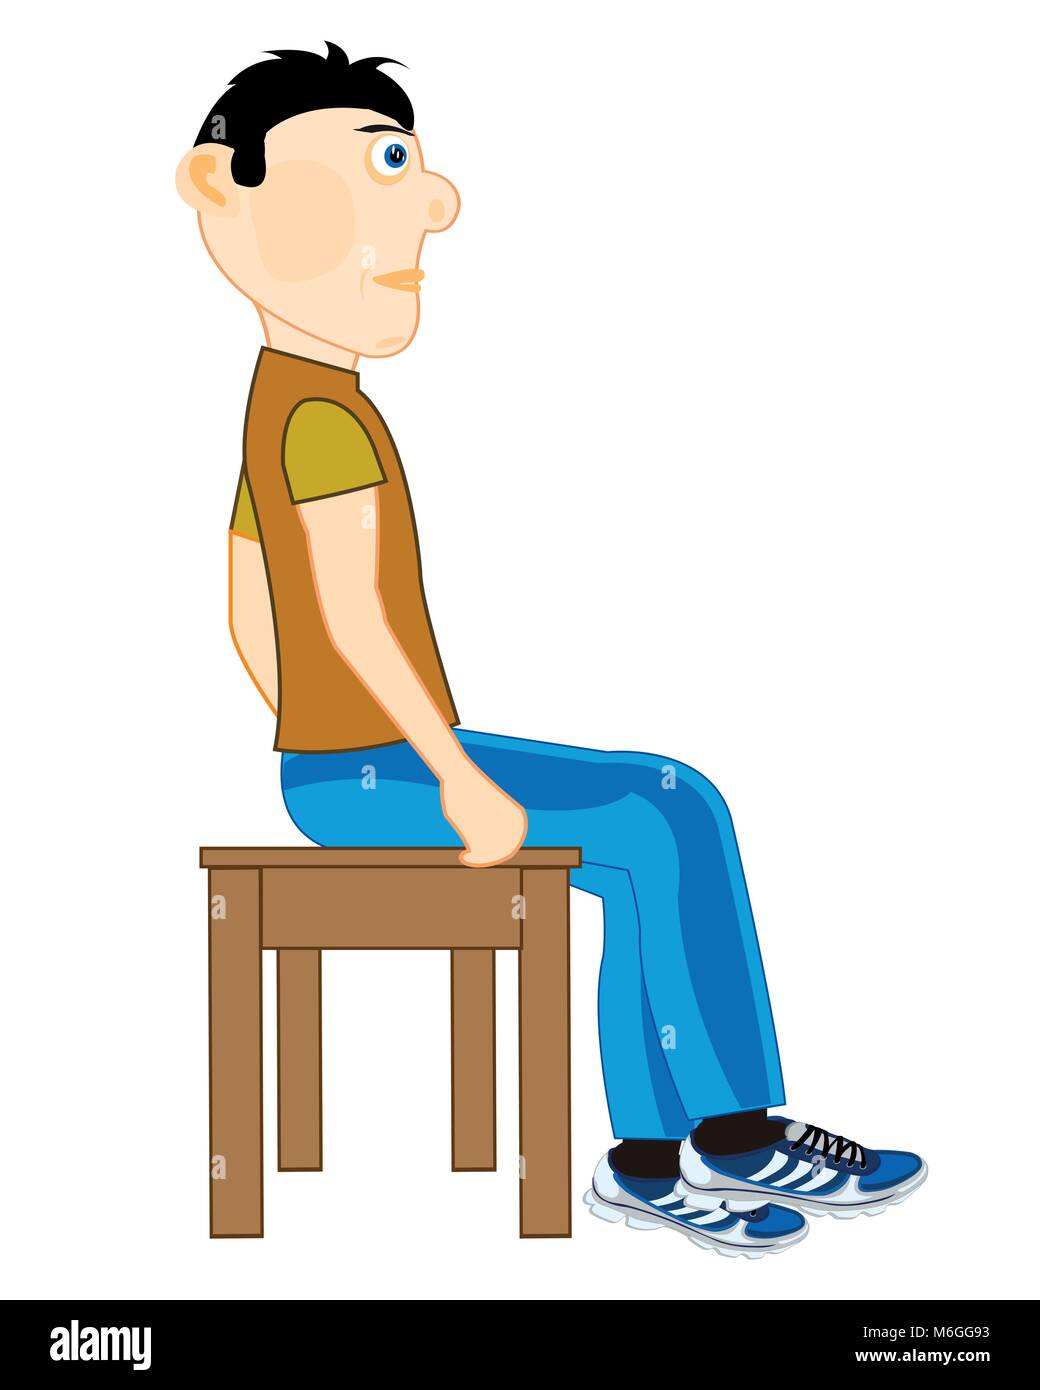 Man sits on chair Stock Vector